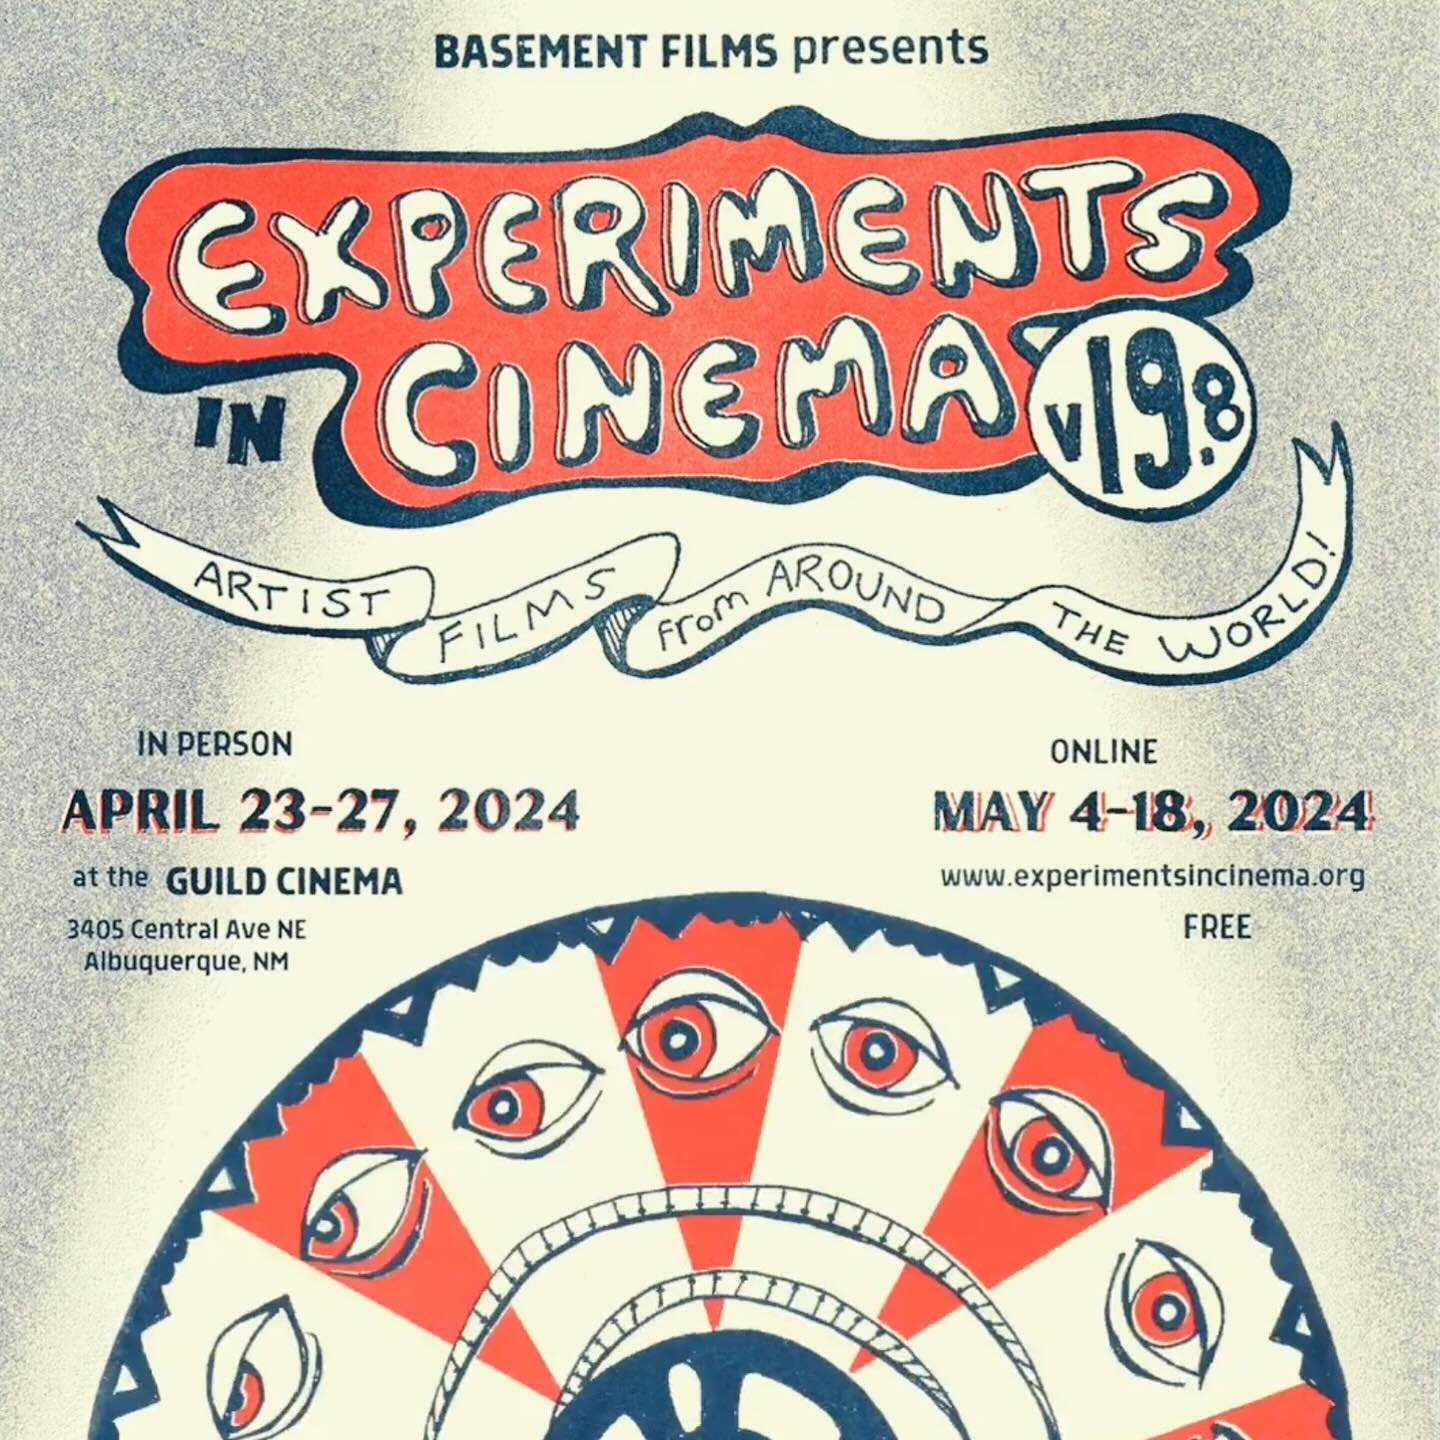 The 19th edition of Experiments in Cinema begins April 23rd! Five days of screenings artist made films. I&rsquo;ll be performing Elective:ART, on Saturday night as expanded cinema. Always a favorite festival to attend, excited to be heading back! @ba